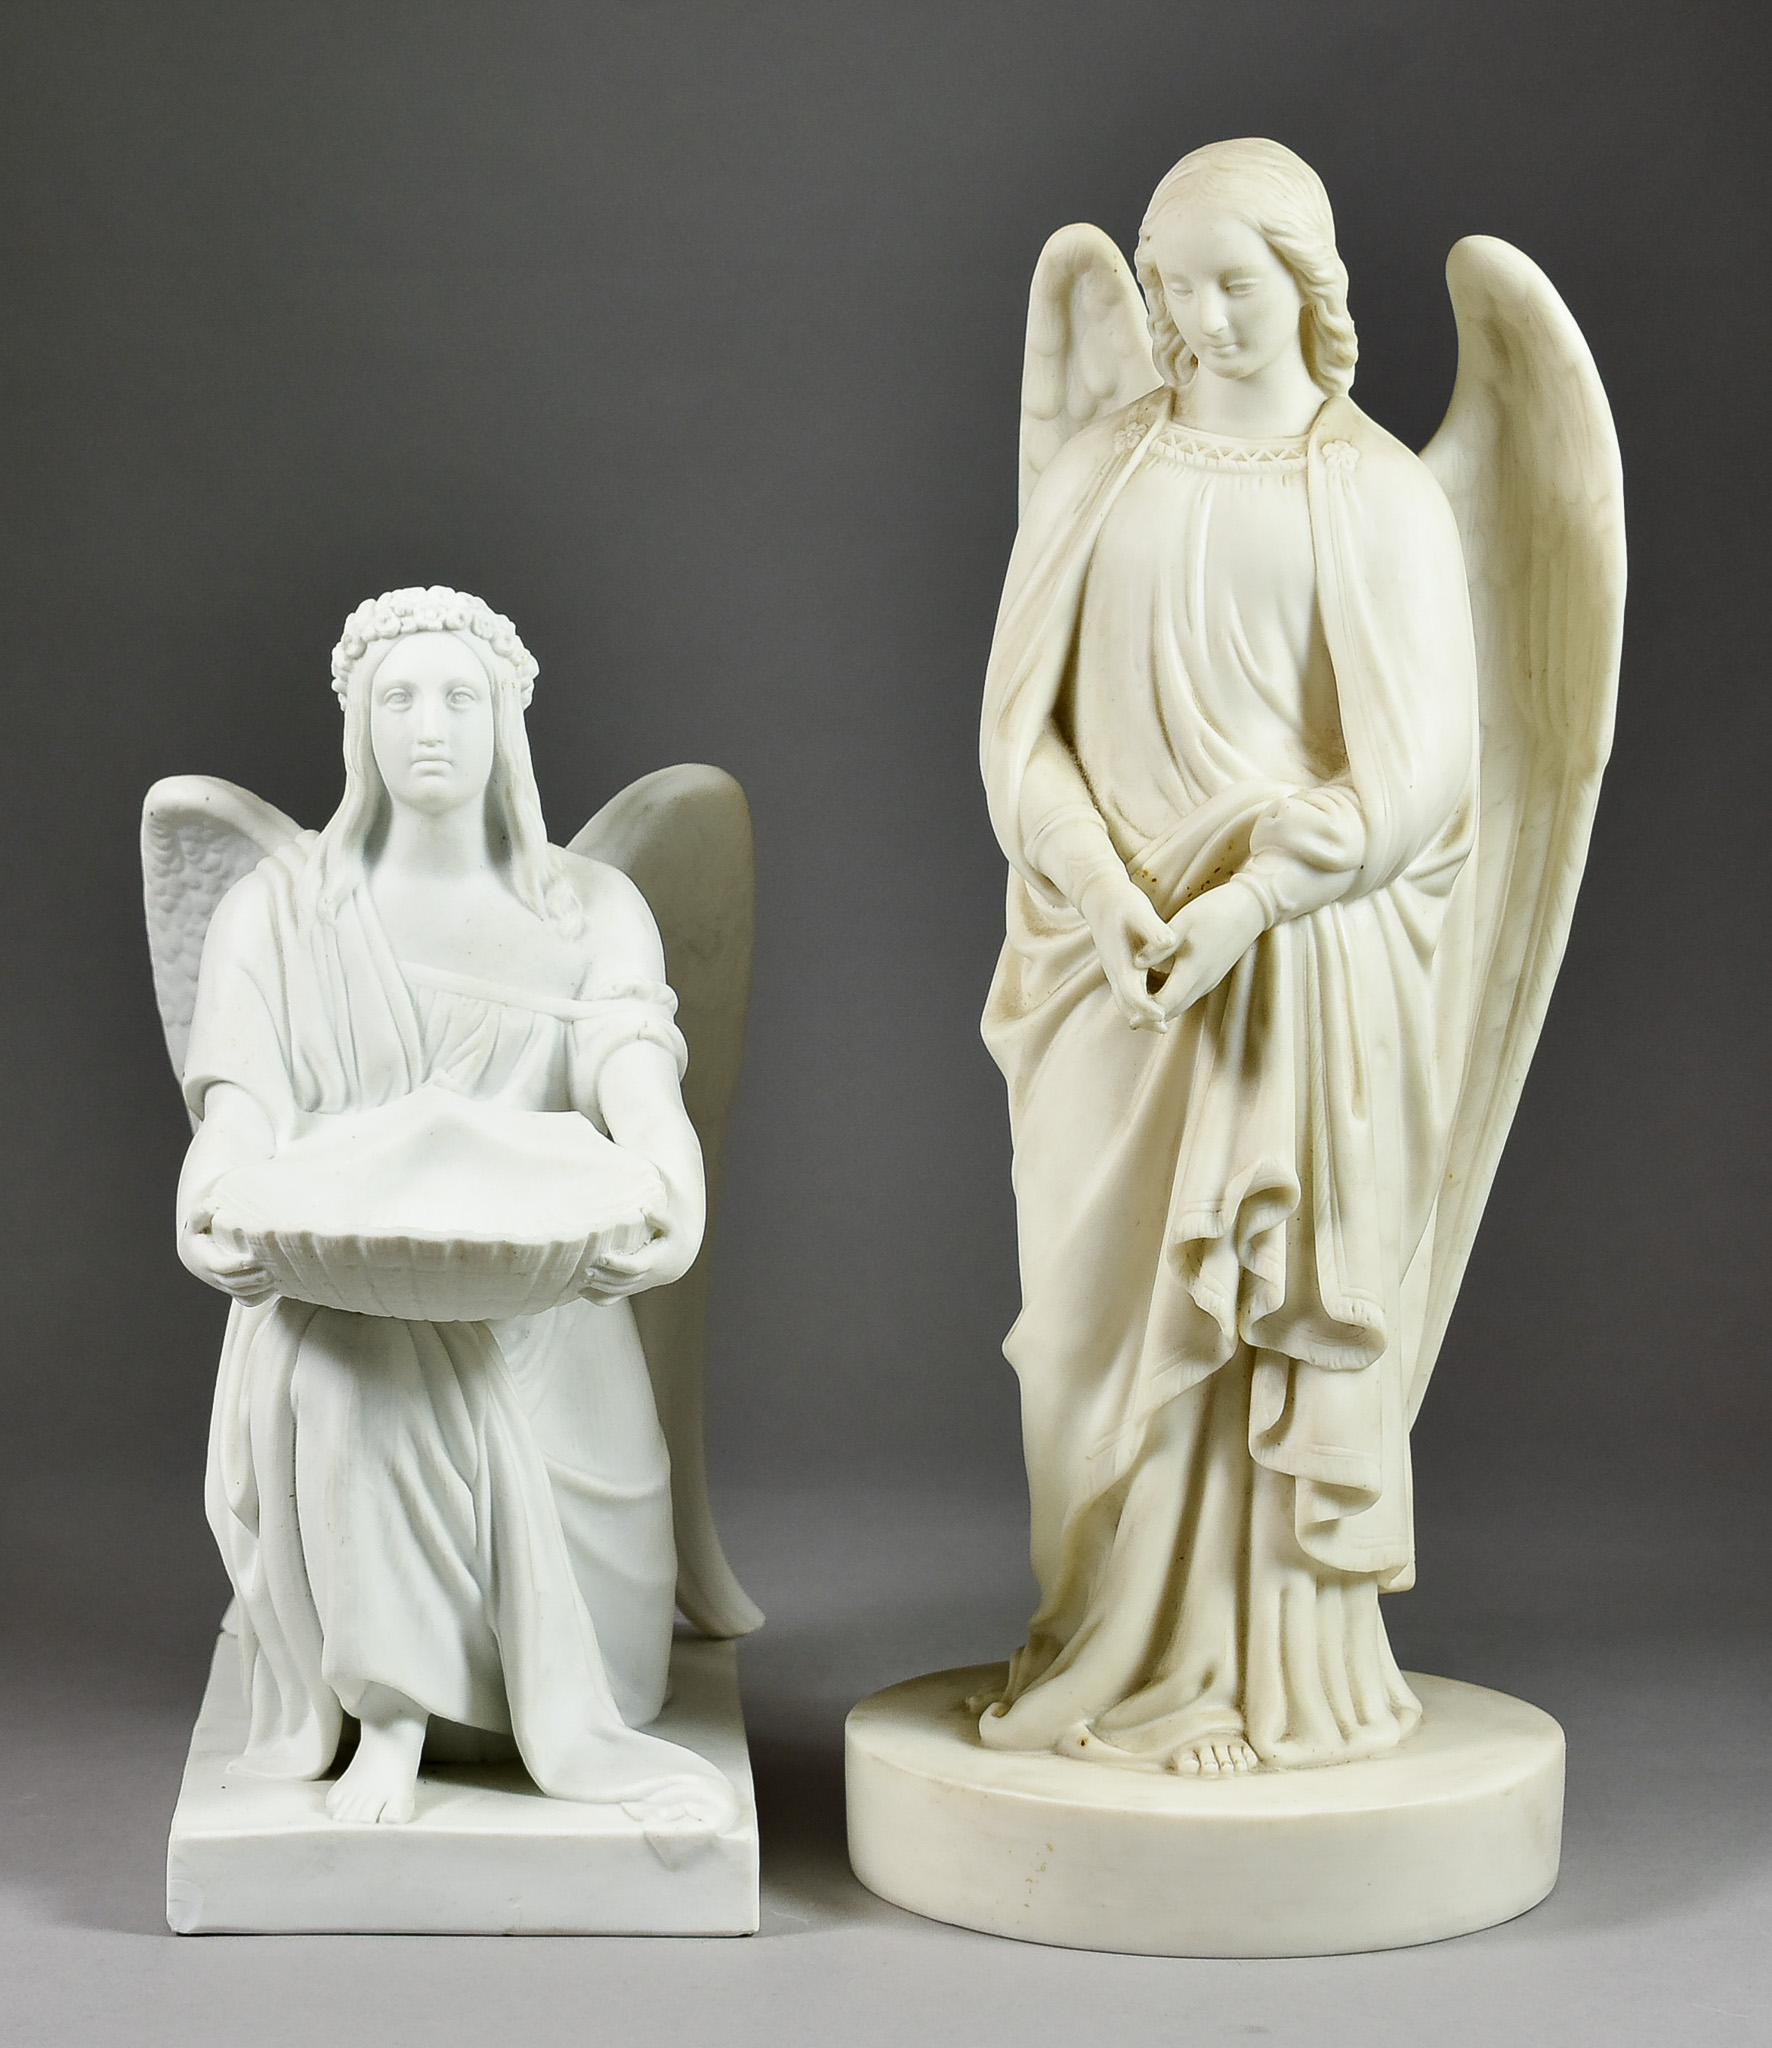 A Bing & Grondahl Bisque Figure after Thorvaldsen, 19th Century, of a kneeling angel supporting a